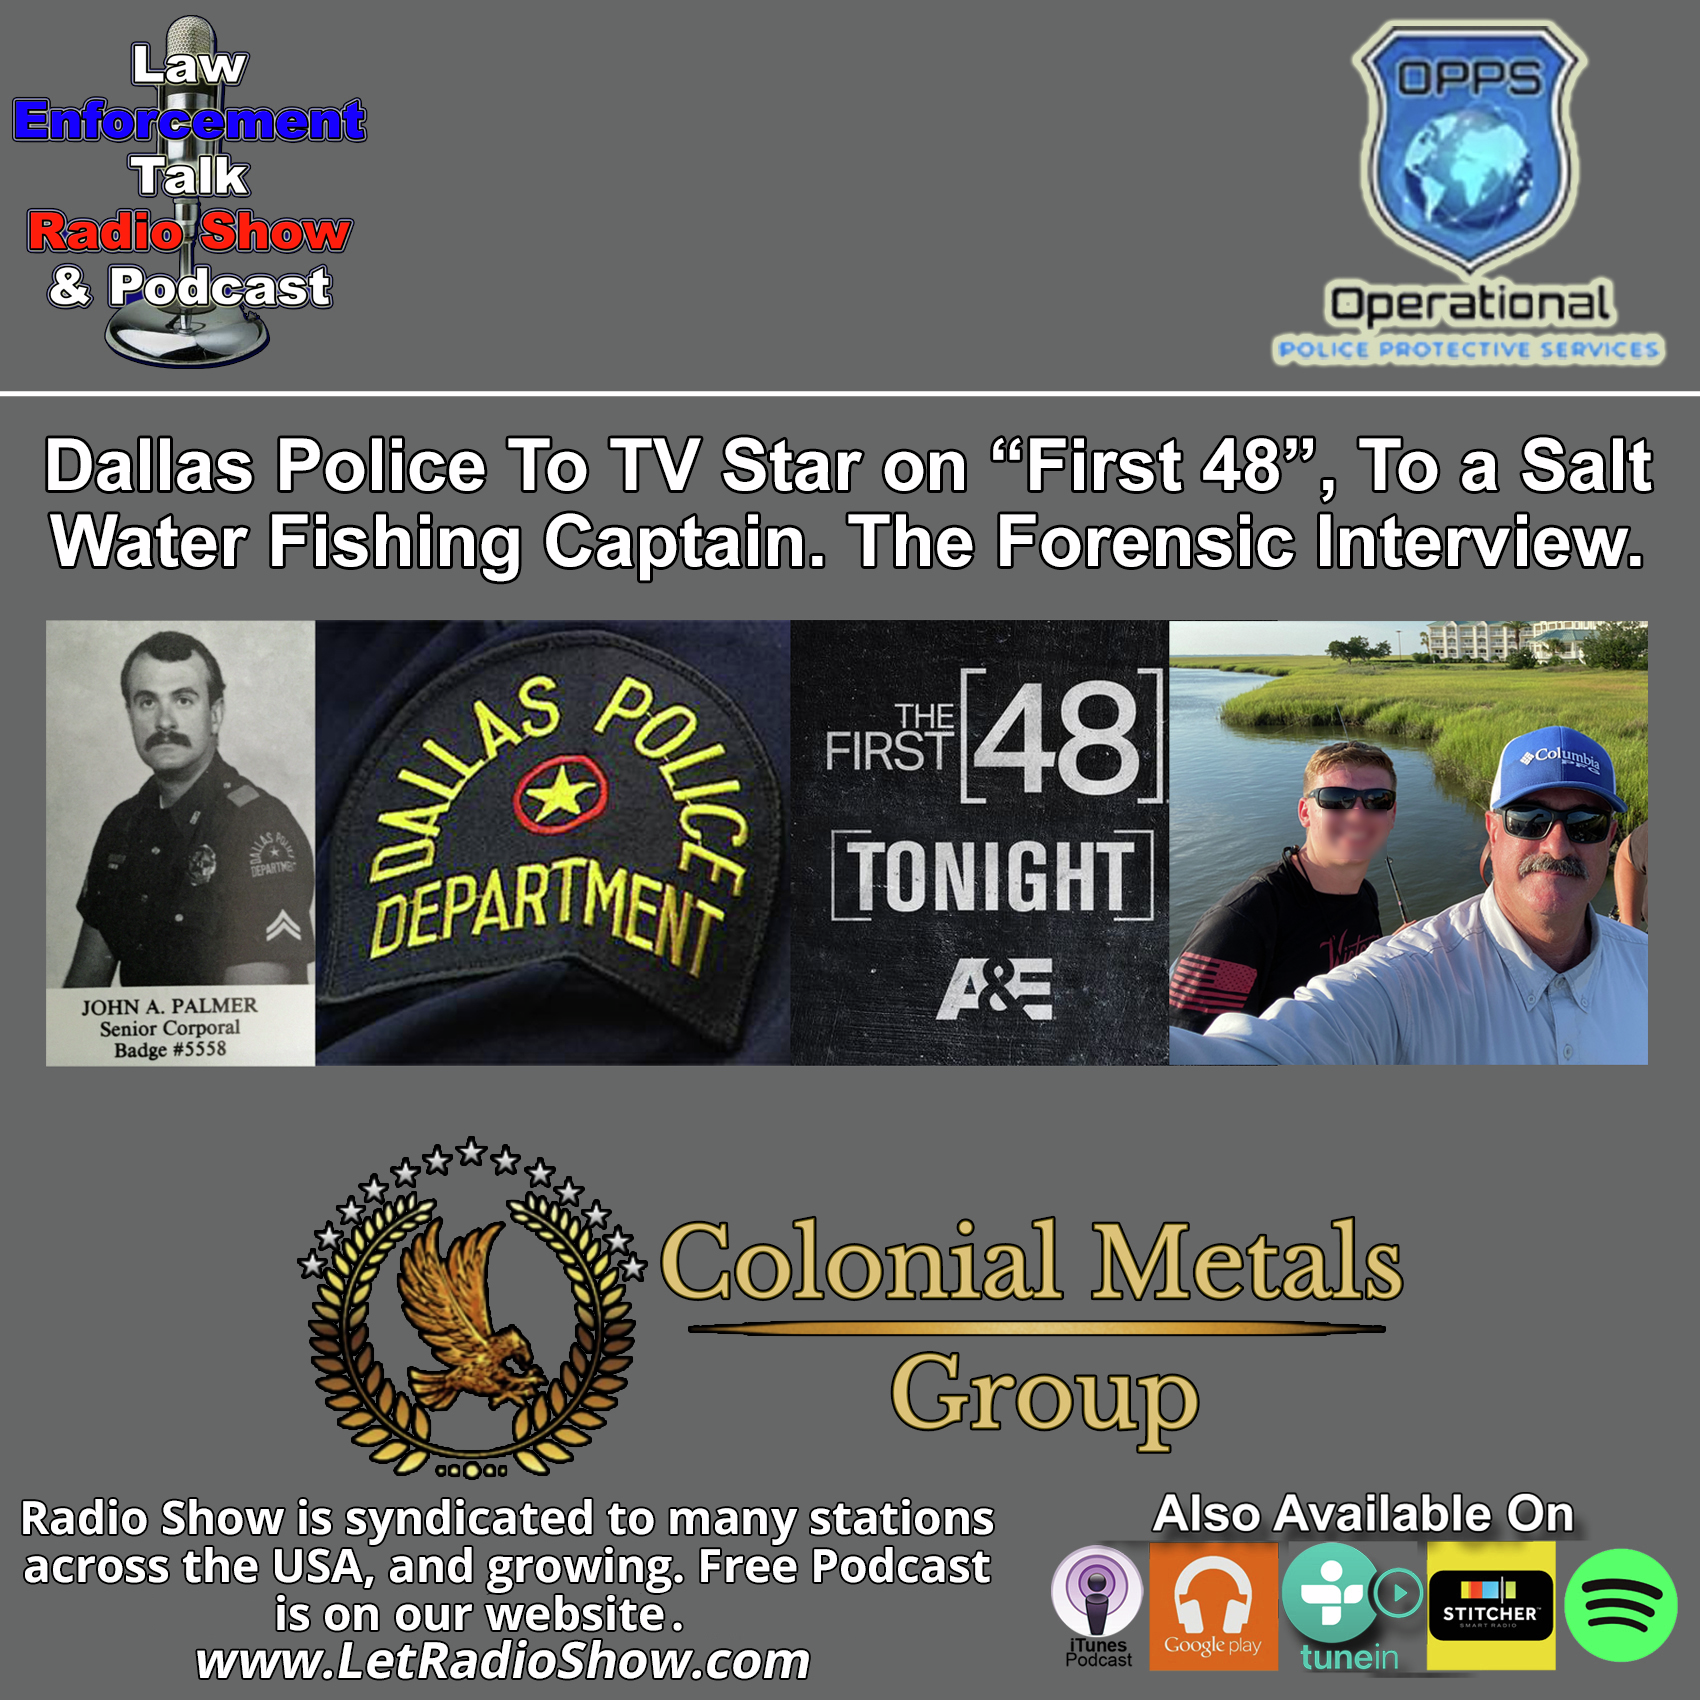 Dallas Police To TV Star on First 48, To a Salt Water Fishing Captain. The Forensic Interview.